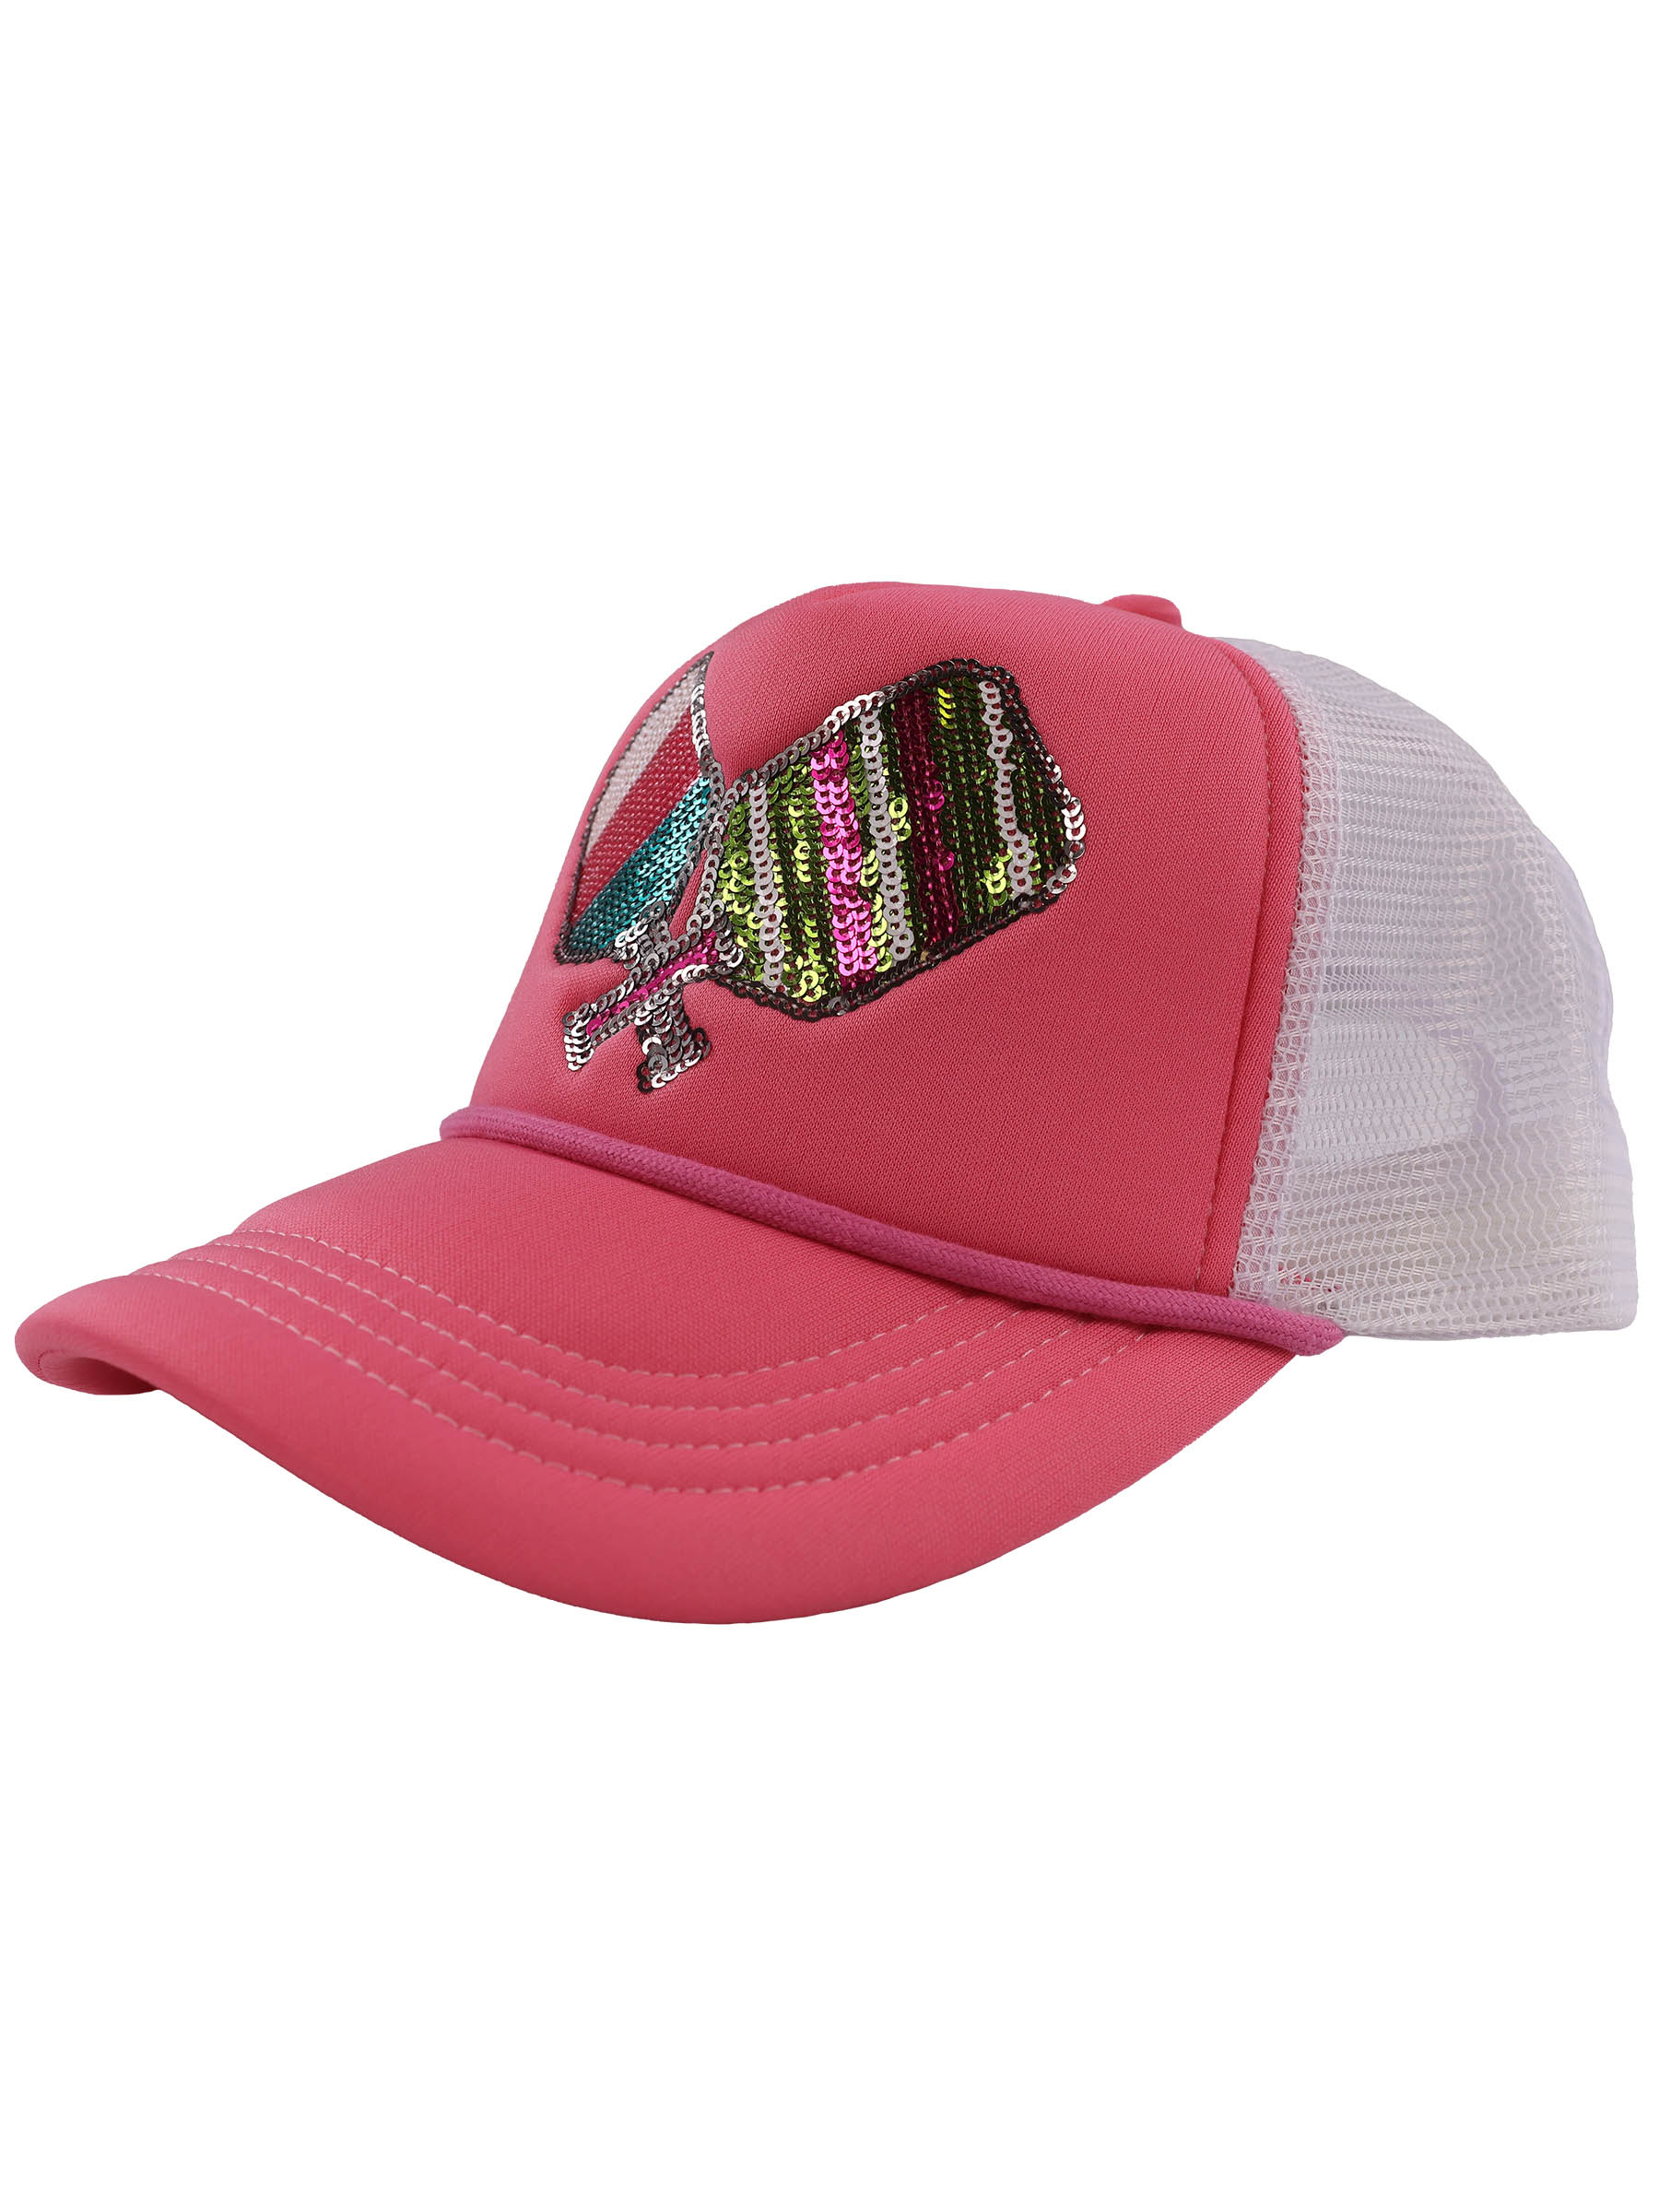 Baseball Hats by Simply Southern